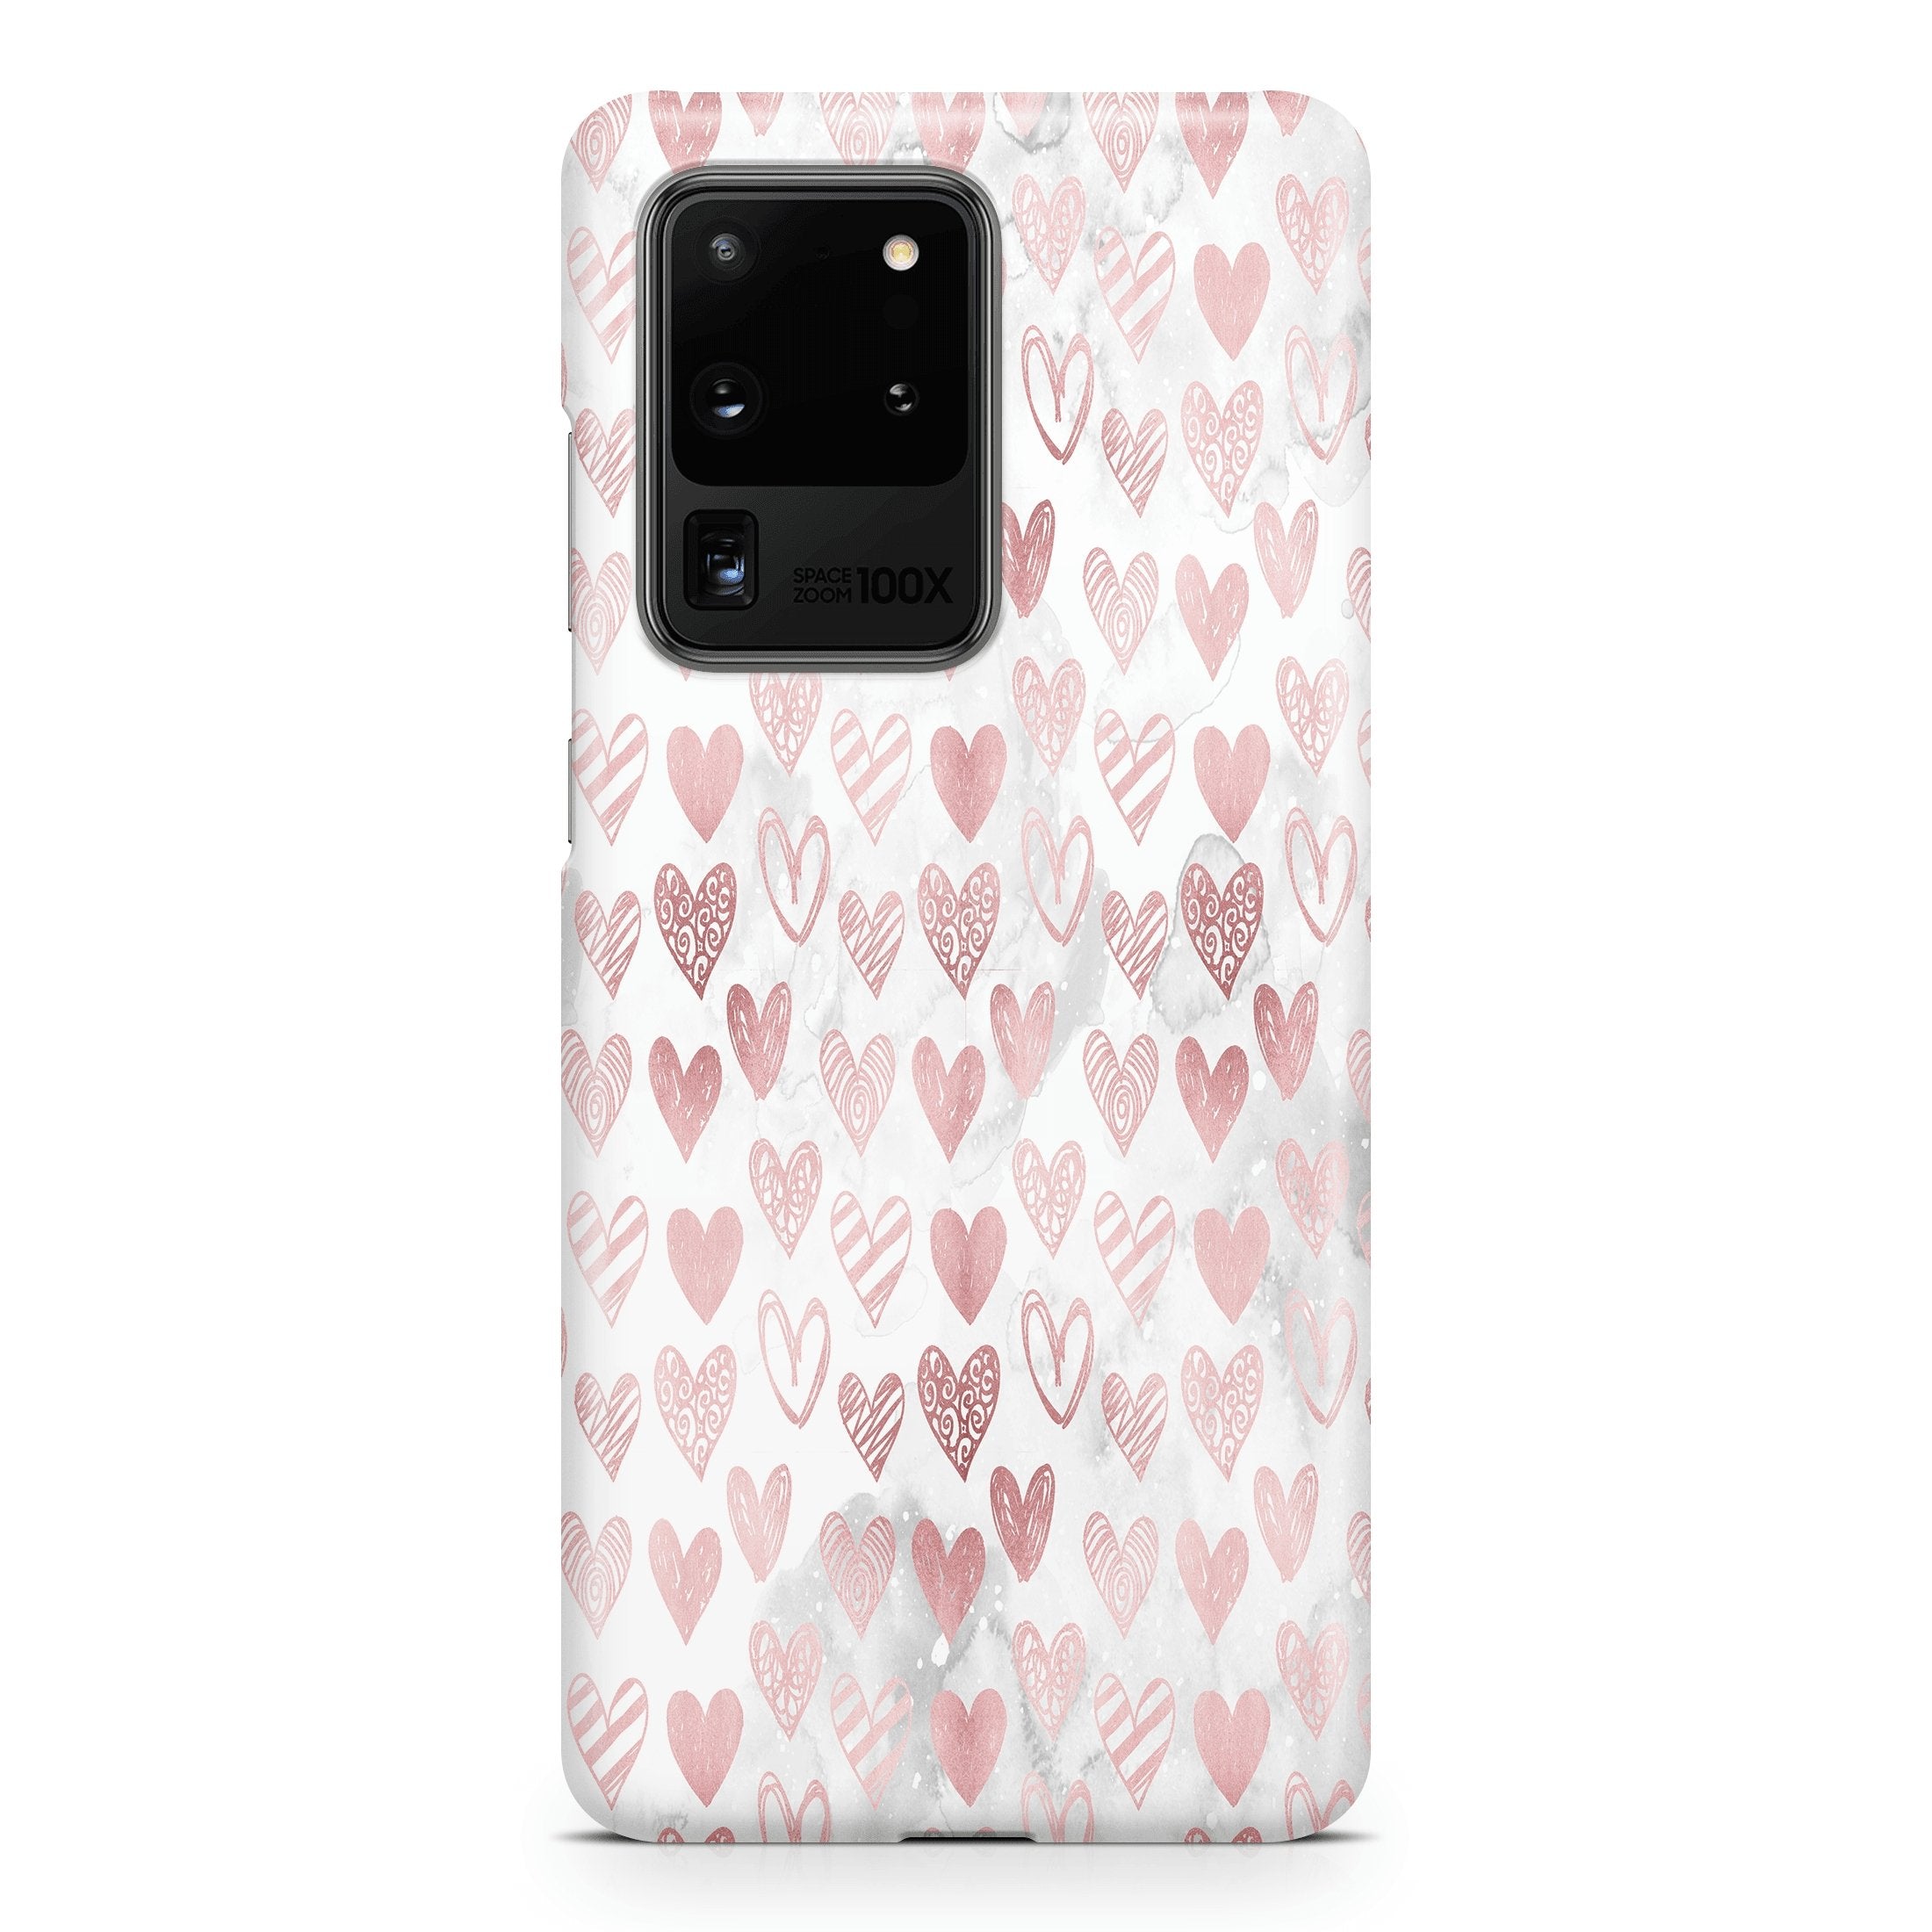 Pink Heart - Samsung phone case designs by CaseSwagger